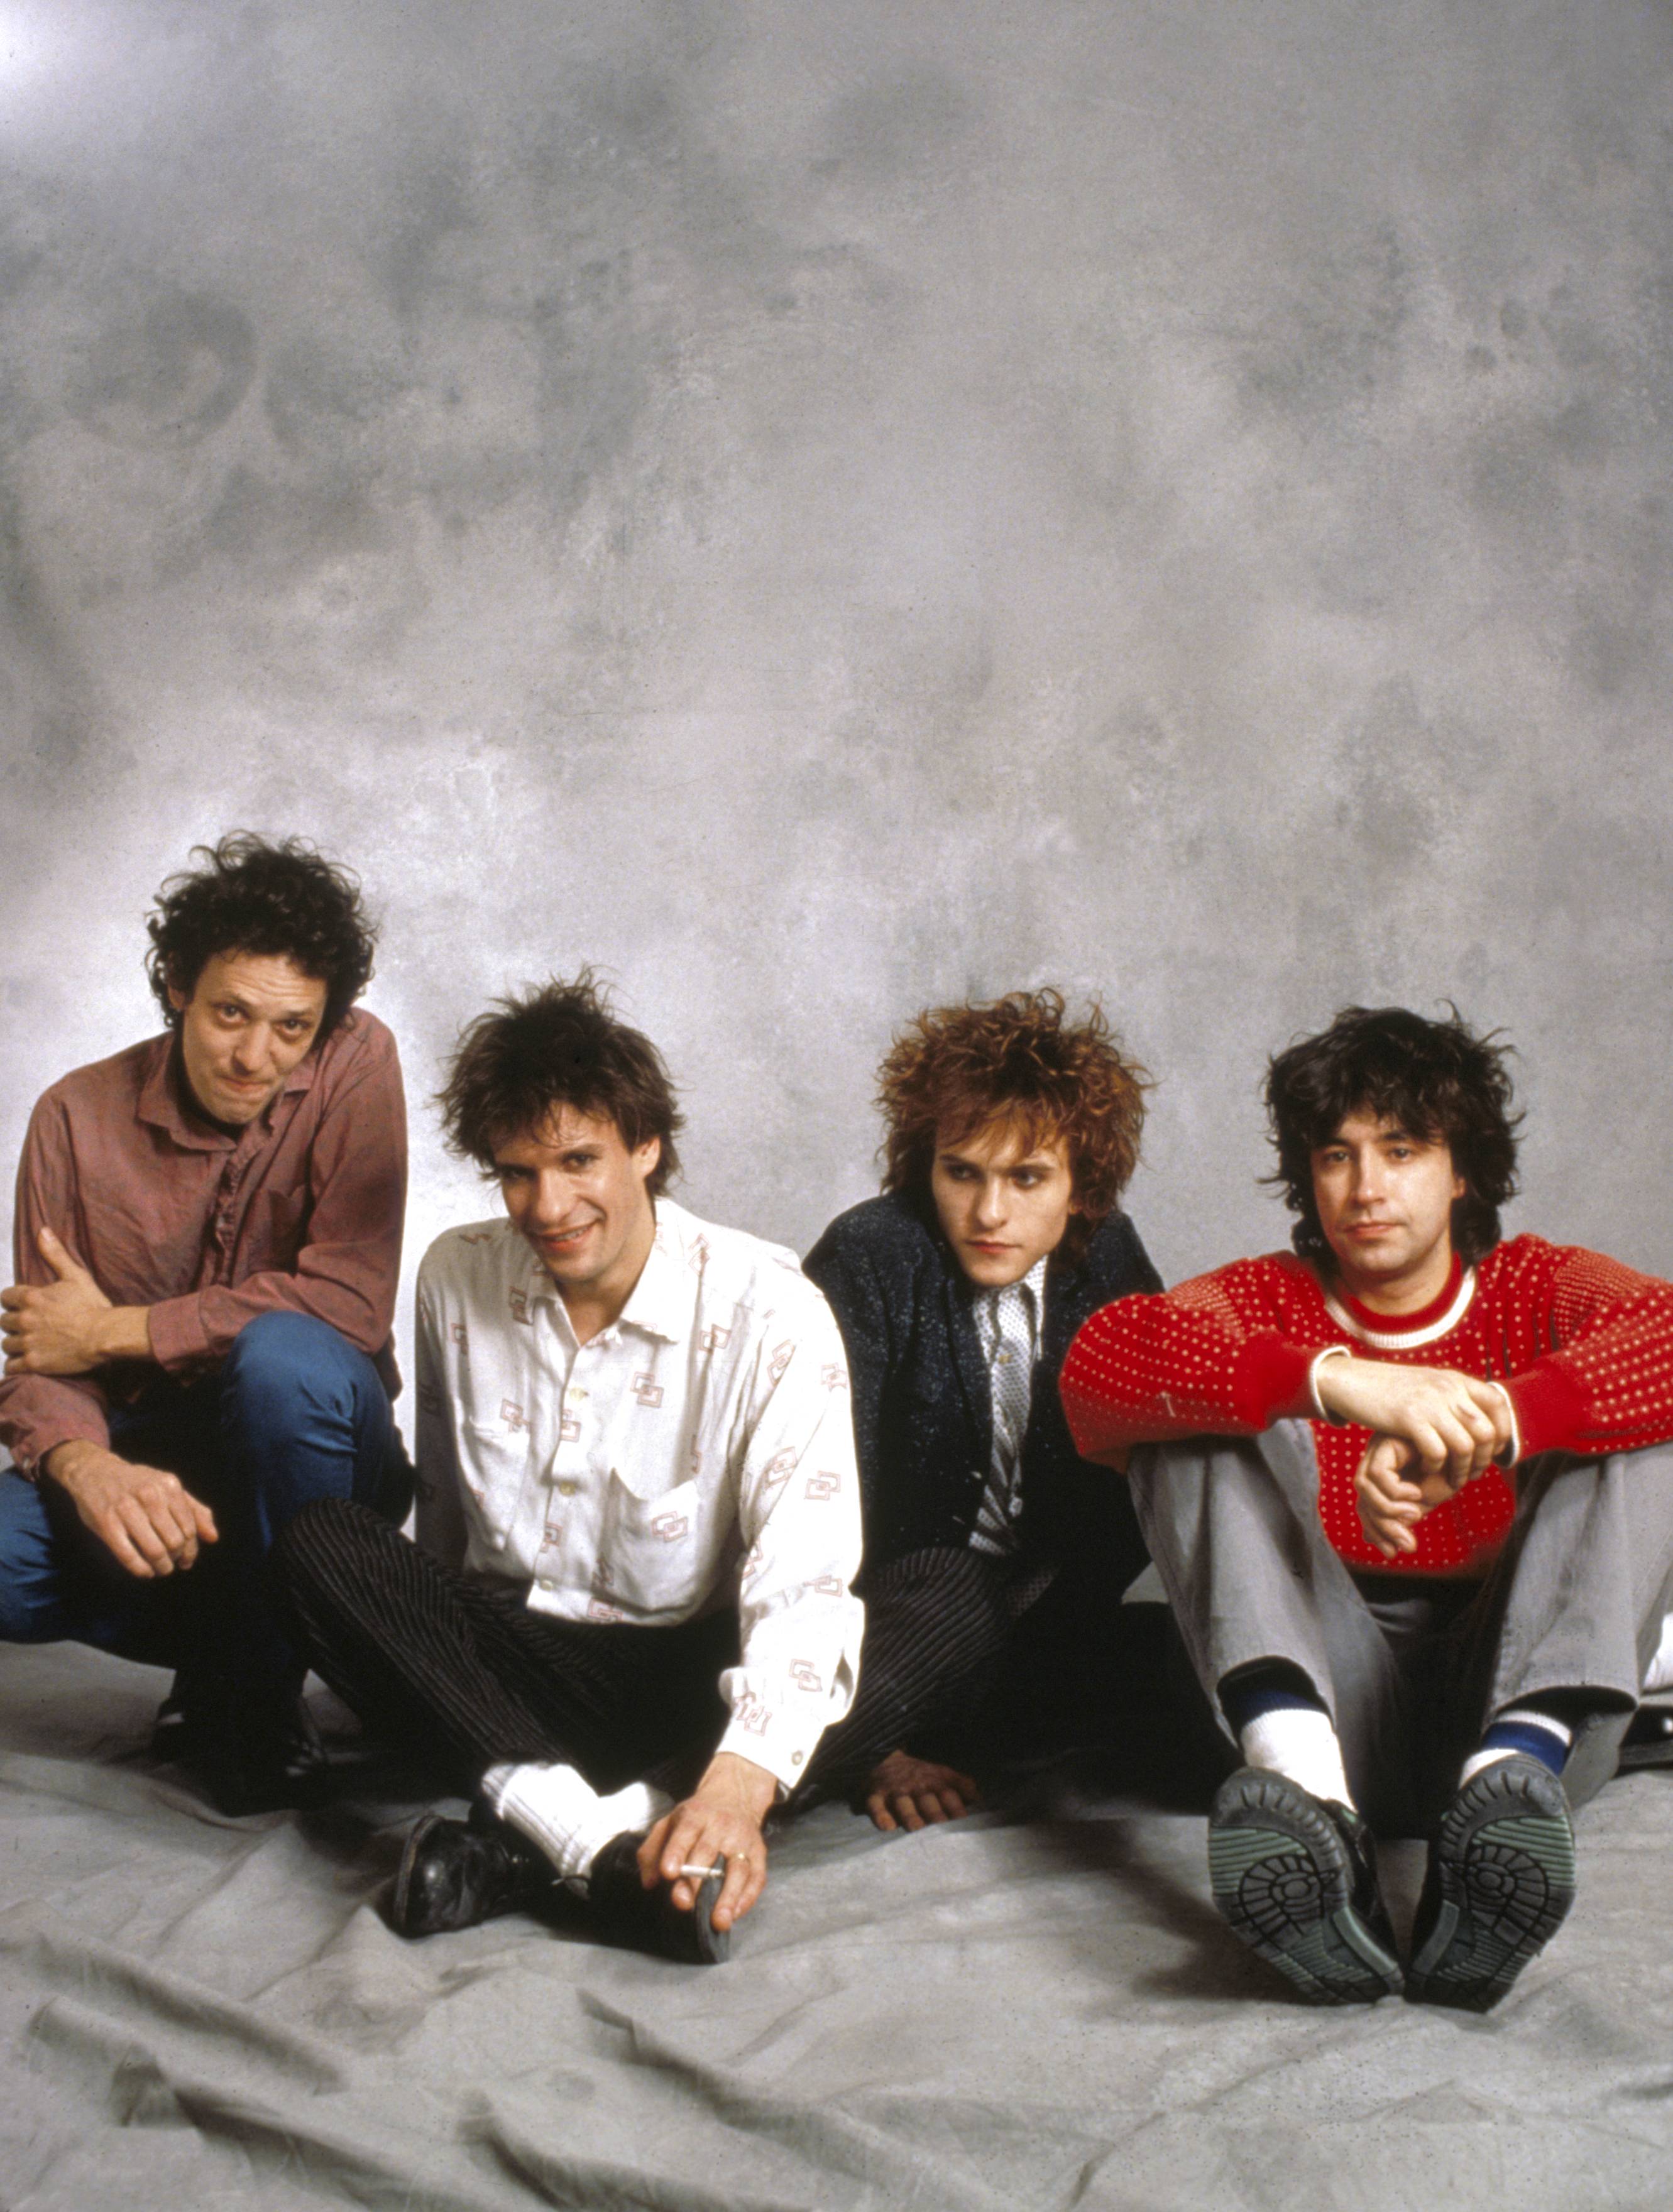 The Replacements: Our 1987 Feature, <i></noscript>
<p>Jesperson likewise had been with the group since the beginning. In 1980, less than a month after their first gig, he signed them to Twin/Tone Records, which he had cofounded, and immediately became their manager. But when they jumped to Warner Brothers in 1985, they moved beyond his managerial depth. Jesperson and the band went their separate ways last August, a move Westerberg feels was, in many ways, harder to digest than the decision fire Stinson.</p>
<p>“Peter was like a fifth member of the band, and in the beginning, I’d give him a lot of credit for our success. He was invaluable. When we had no money at all, he would always buy us drinks and lunch and things like that. He kept us together in the beginning. And then we grew up a little. We were young when we started—I was 19, Tommy was 13, and he was six or seven years older, and he could calm us down when we needed it. Consequently, we grew up to the point where we could call ’em ourselves. We didn’t need a ‘dad’ or a ‘big brother’ anymore; we needed someone to guid our career more than we needed someone to take care of us.”</p>
<p>Warner Brothers provided the career-guiding management to replace Jesperson. To fill the void Stinson left, the band chose Bob “Slim” Dunlap, longtime sidekick of local legend Curtiss A. His “audition” consisted of an afternoon of drinking beer.</p>
<p>“Slim is more like a fourth member of the band than a hired gun,” Westerberg says. “We originally thought that it would be a good idea to get a hot guitar player and be the Replacements and…Joe Blow. As it is now, it’s like the Replacements with a new guy who isn’t a <i>great</i> guitar player, isn’t a <i>great</i> singer, just as we are not great at what we do, and he fits in perfectly. He’s working out good, but the tale will really be told when we play live.”</p>
<div class=